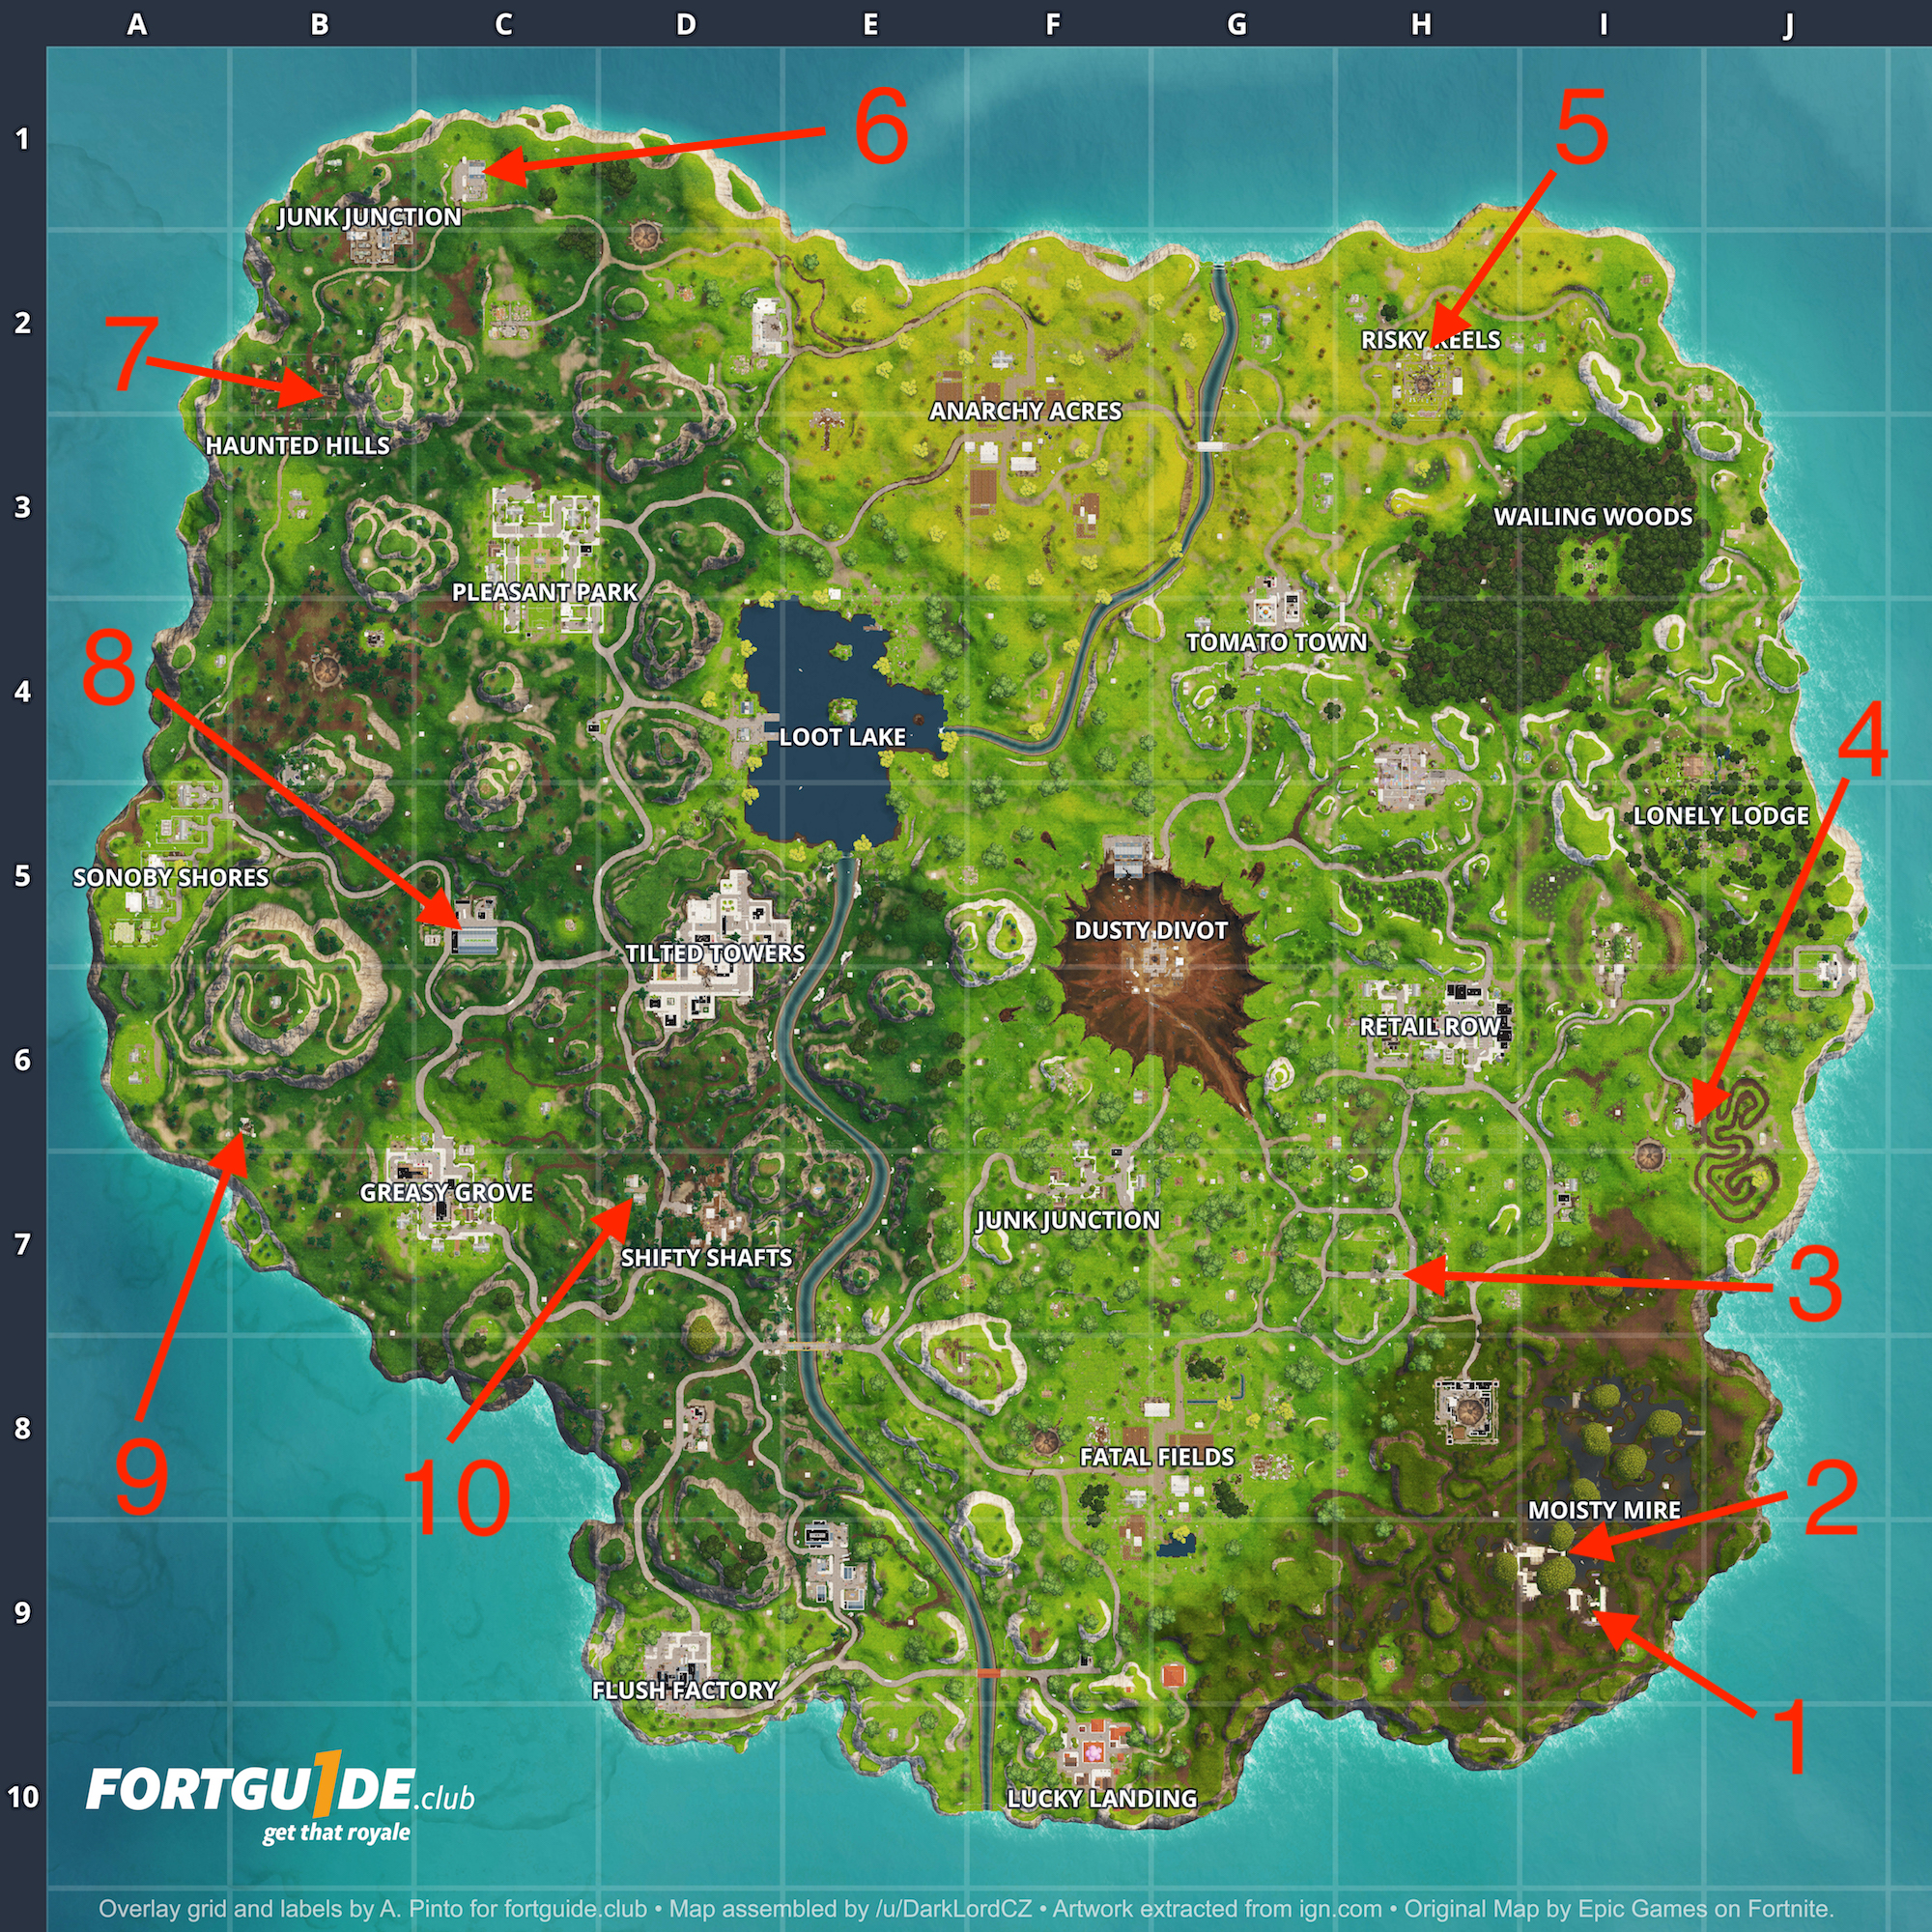 fortnite dance in front of cameras a definitive guide to map locations inverse - camera locations for fortnite